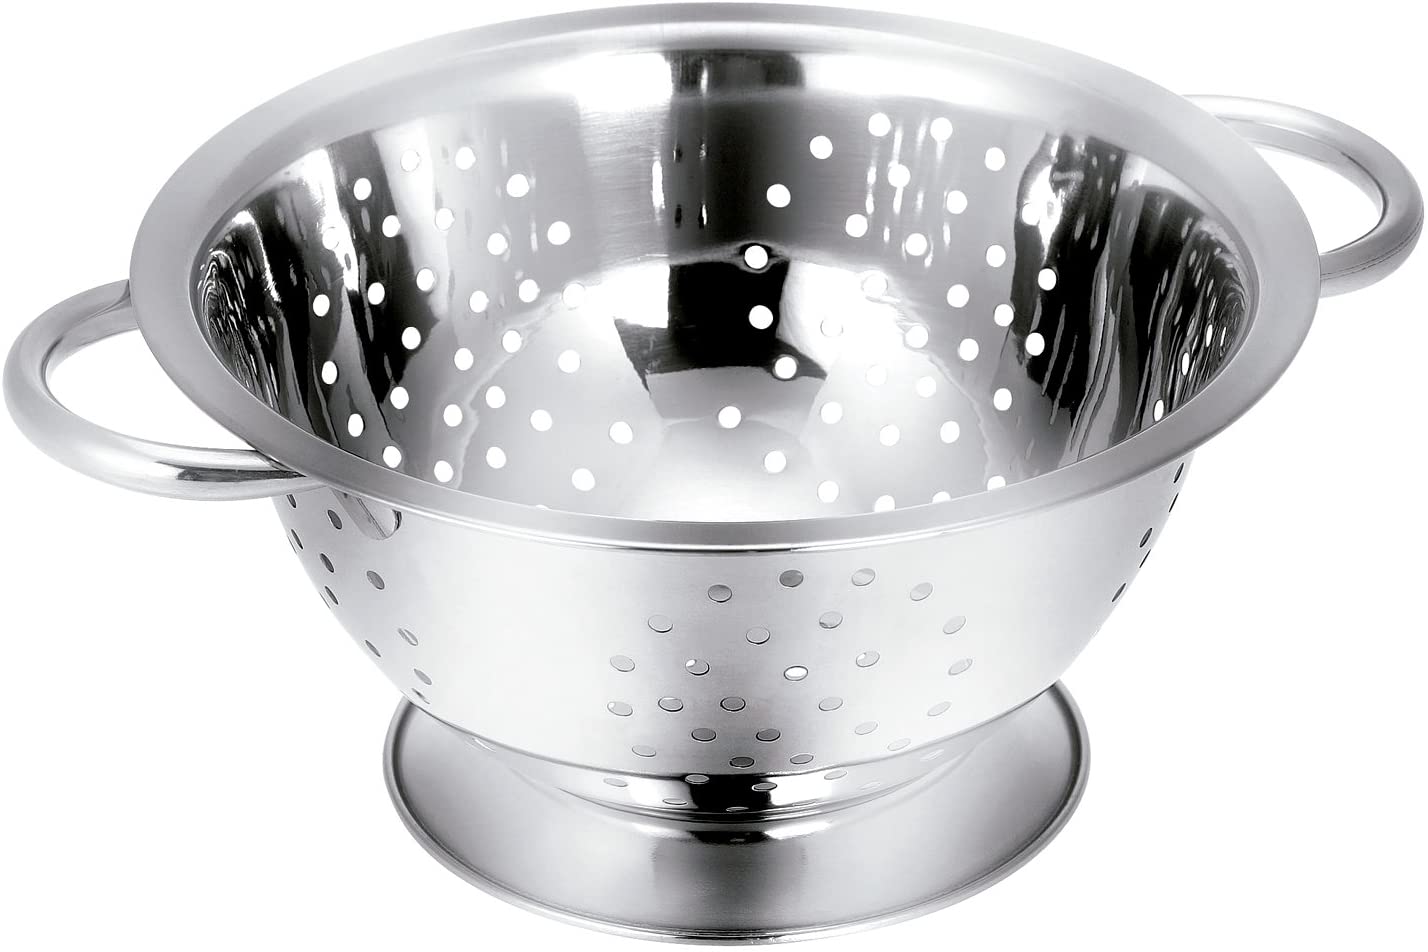 Tescoma 428510 Stainless Steel Footed Colander, Grey